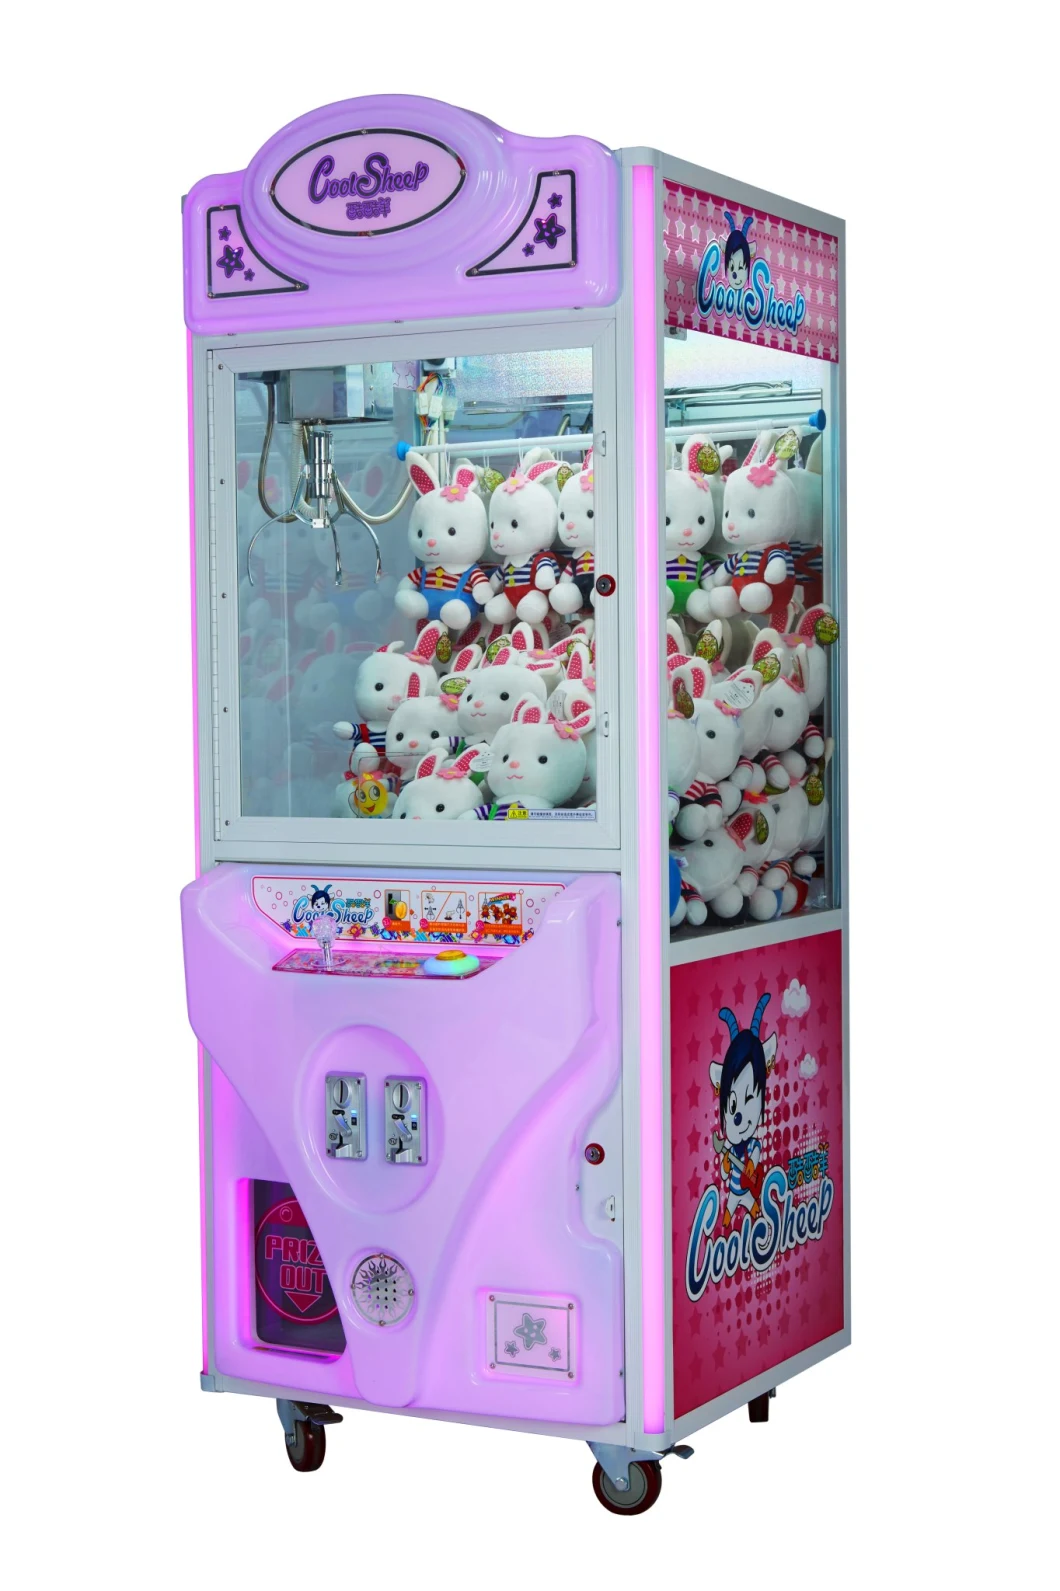 Wholesale Mini Coin Pusher Key Master/Toy Vending/Vending/Claw Machine/Game Player/Arcade Game Machines/Video Game/Amusement Machine/Arcade Machine/Game Machine